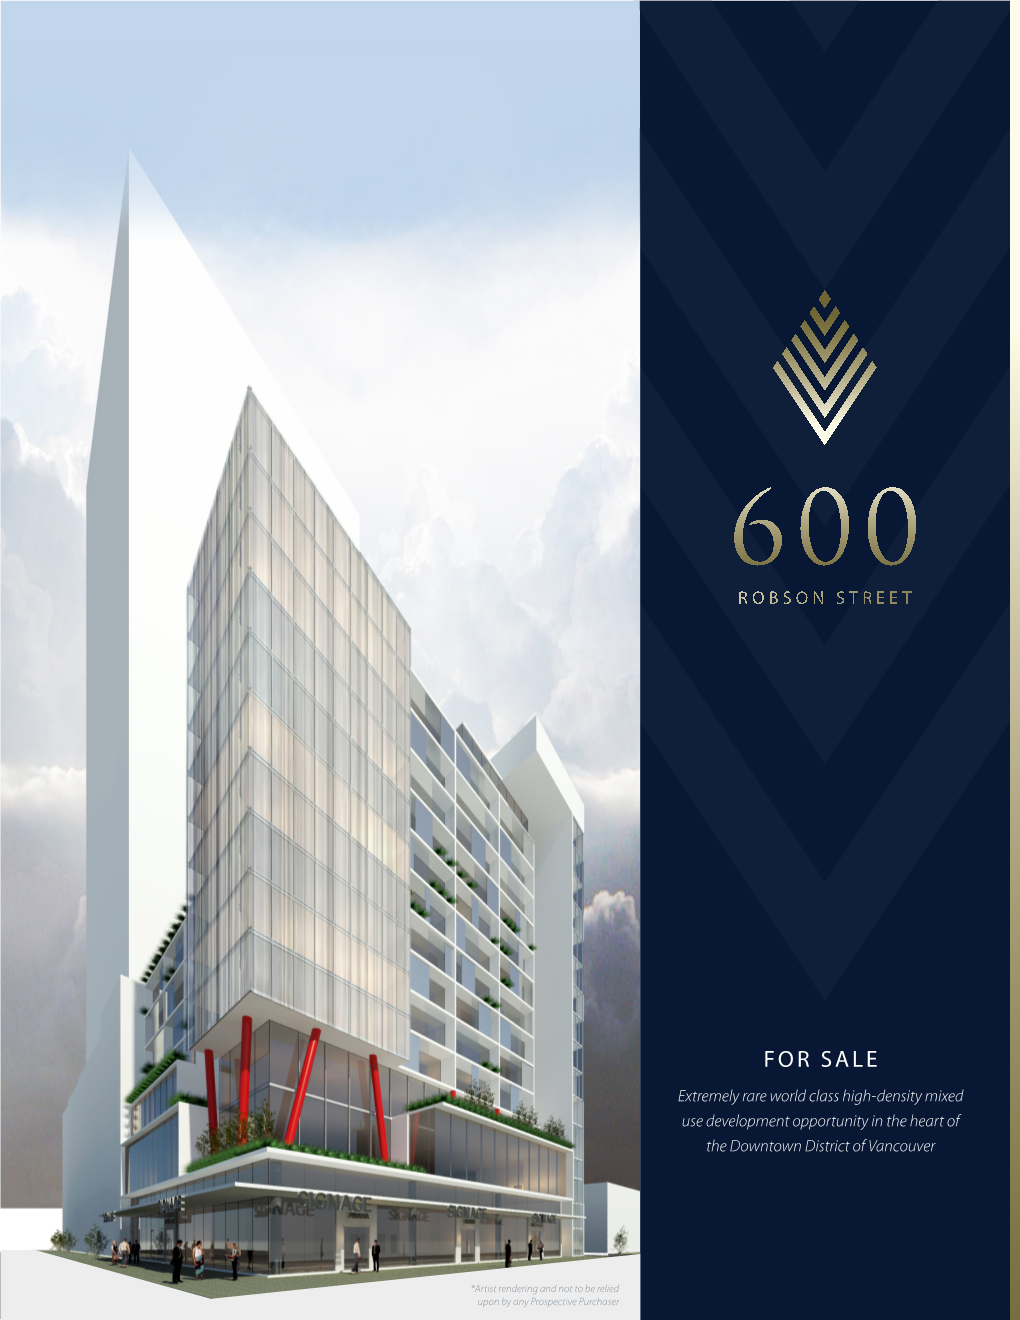 FOR SALE Extremely Rare World Class High-Density Mixed Use Development Opportunity in the Heart of the Downtown District of Vancouver